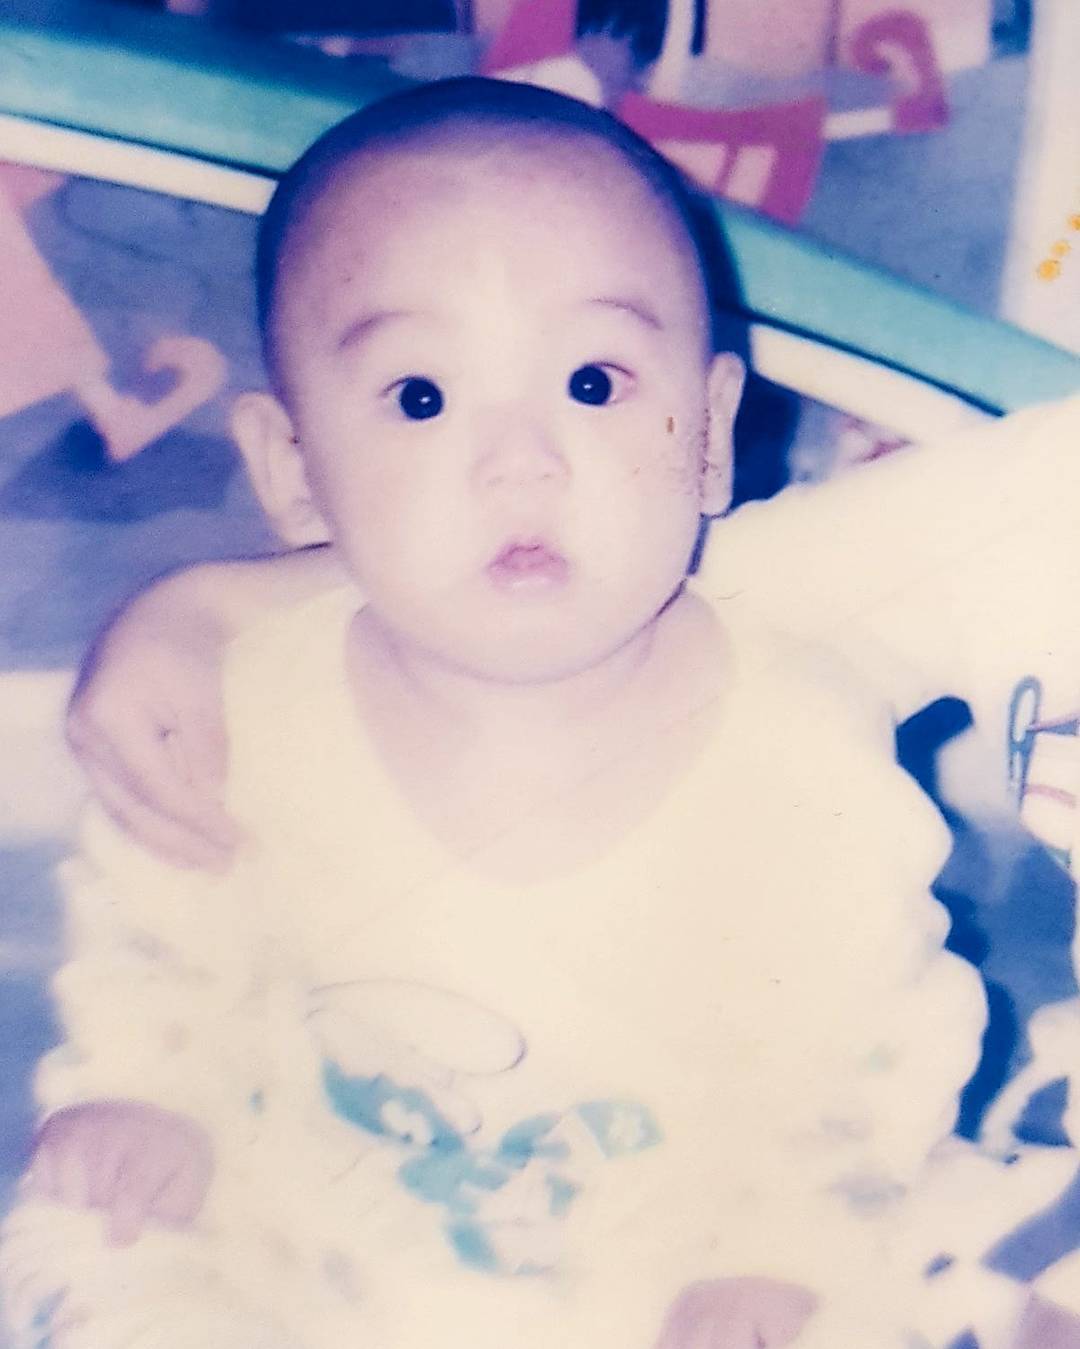 Here Are The Brand New Never Before Seen Baby Photos Of BTS Jungkook